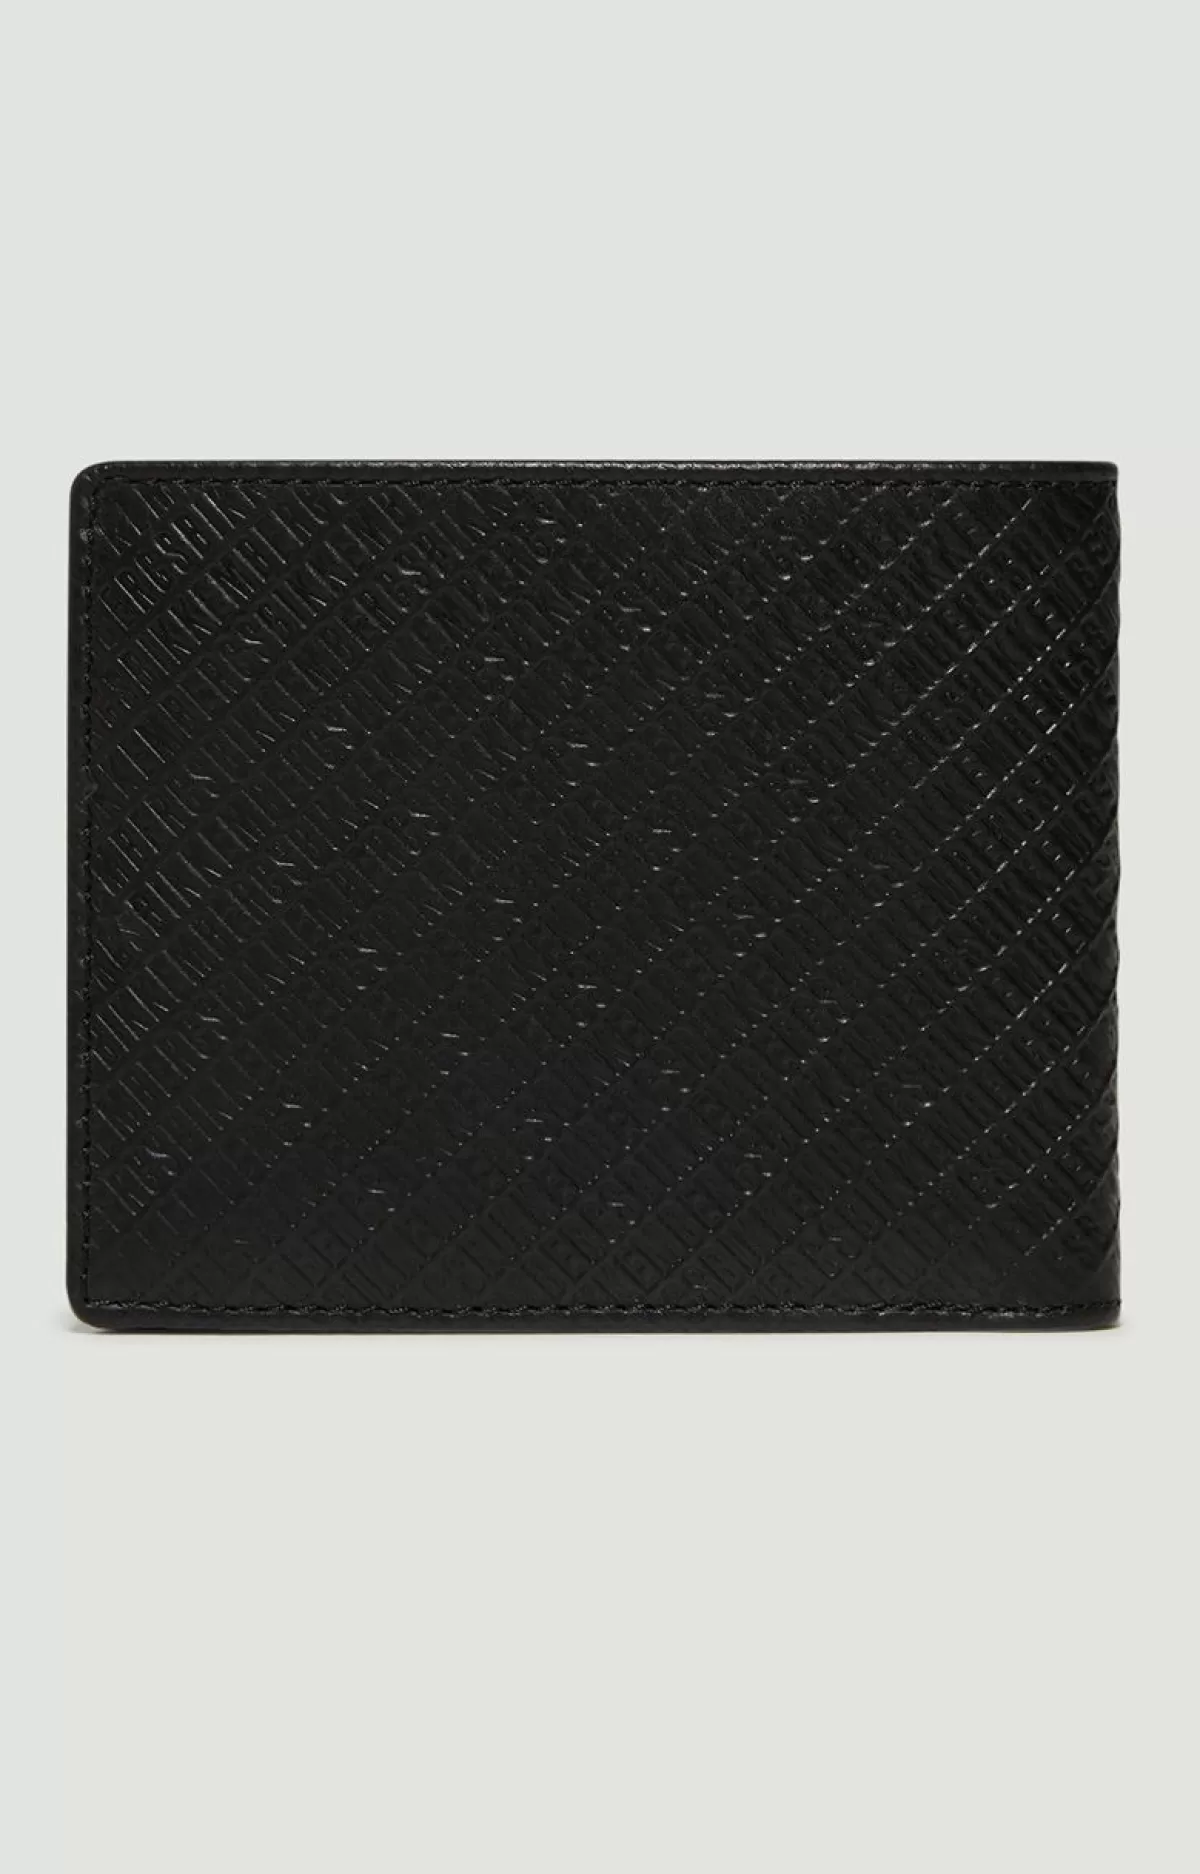 Bikkembergs Compact Men'S Leather Wallet With All-Over Pattern Black Best Sale